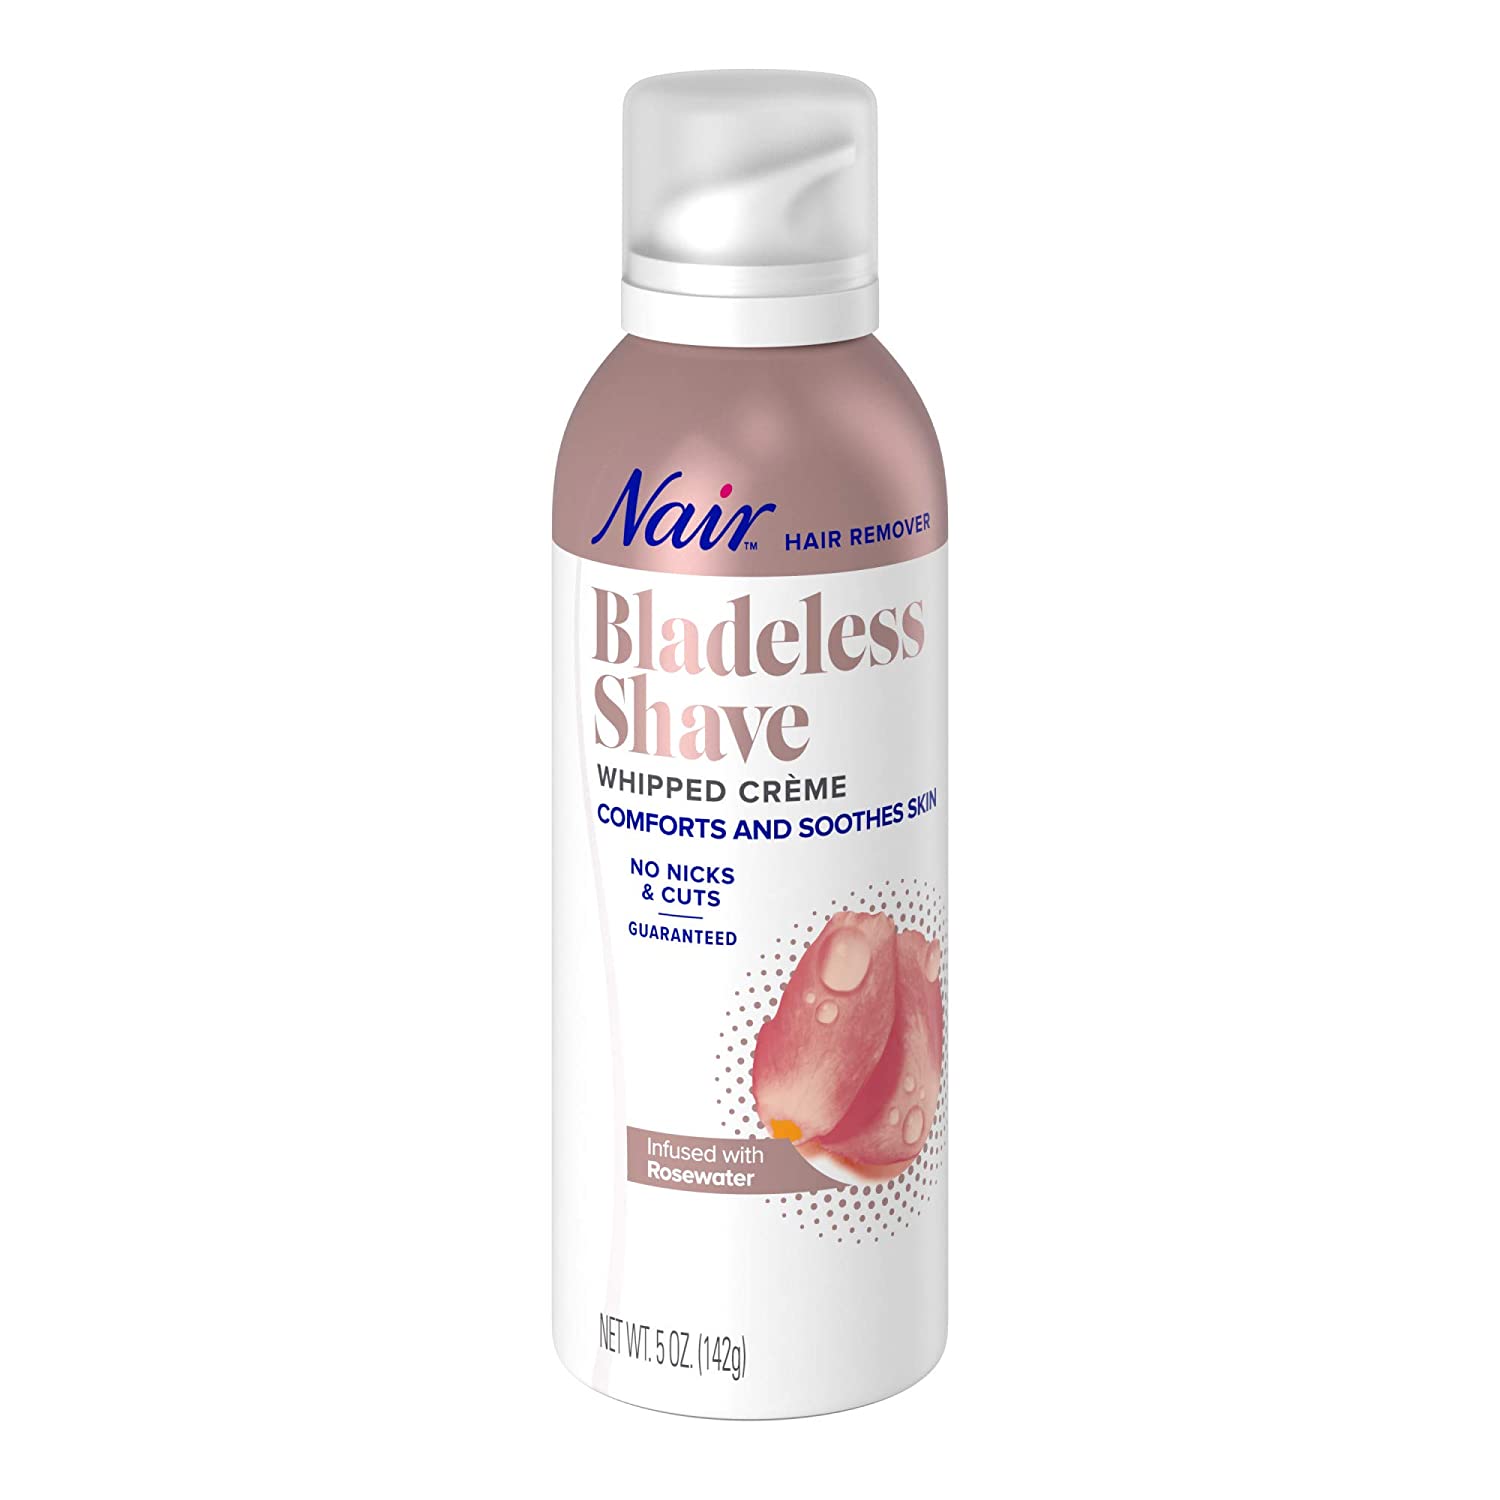 Nair Hair Remover Bladeless Shave Whipped Crème Infused with Rosewater